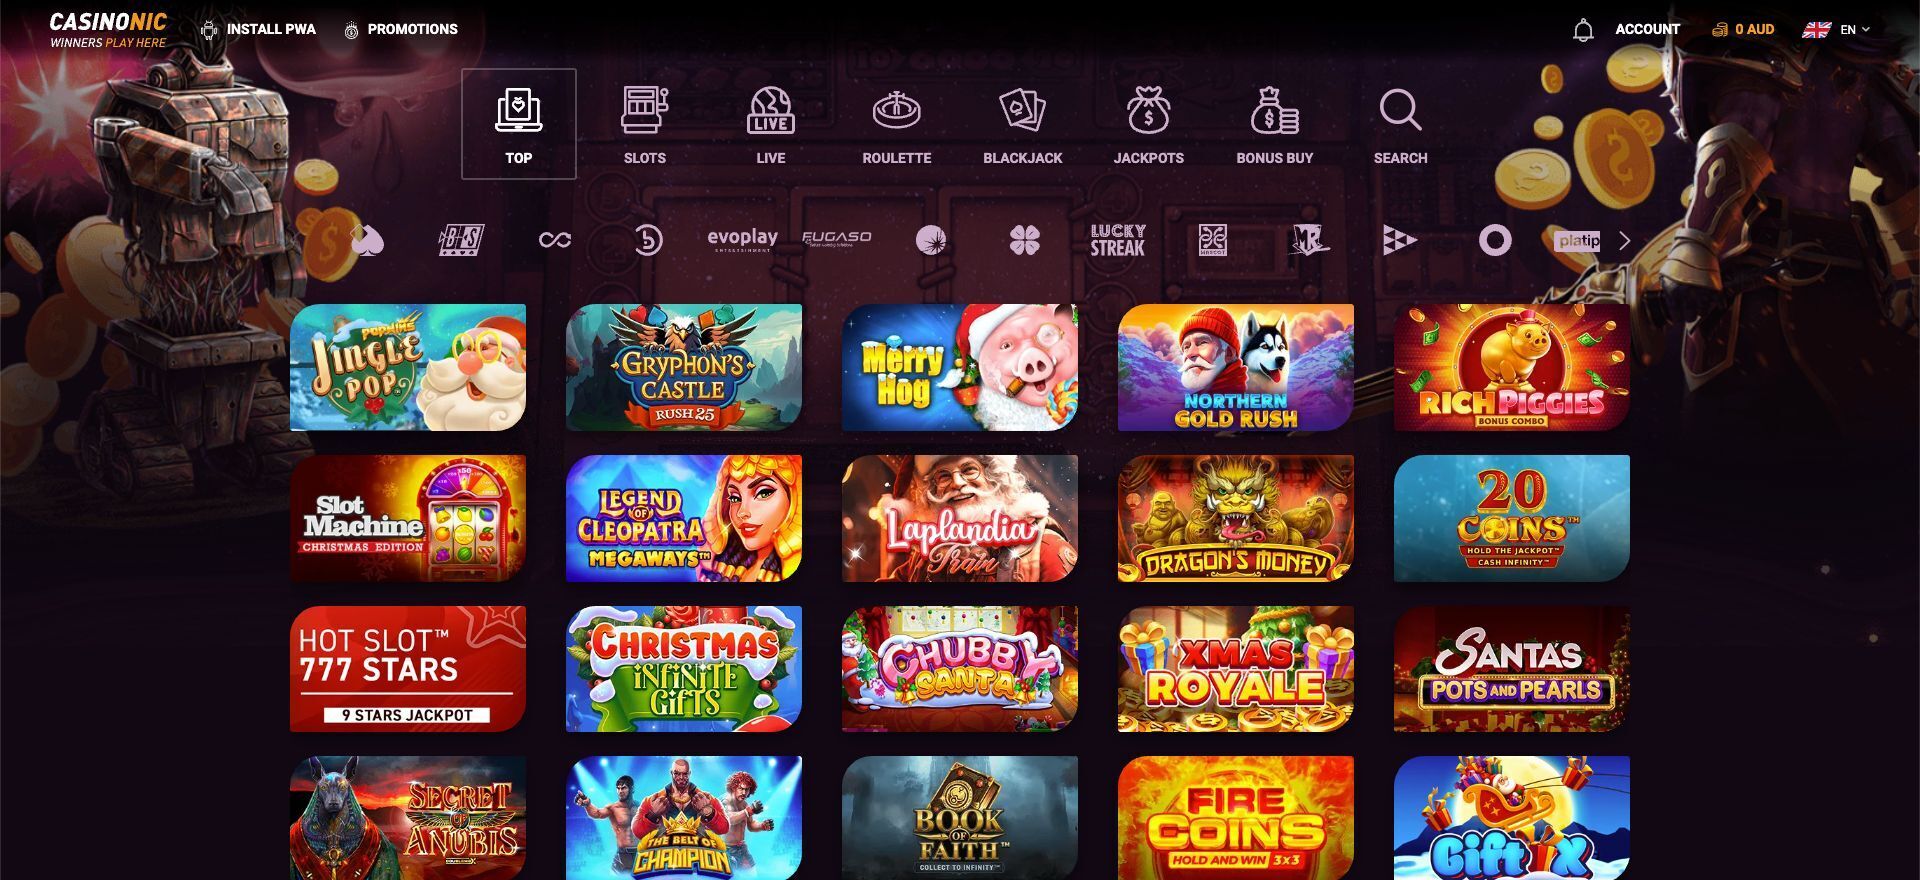 Casinonic Top Games Page